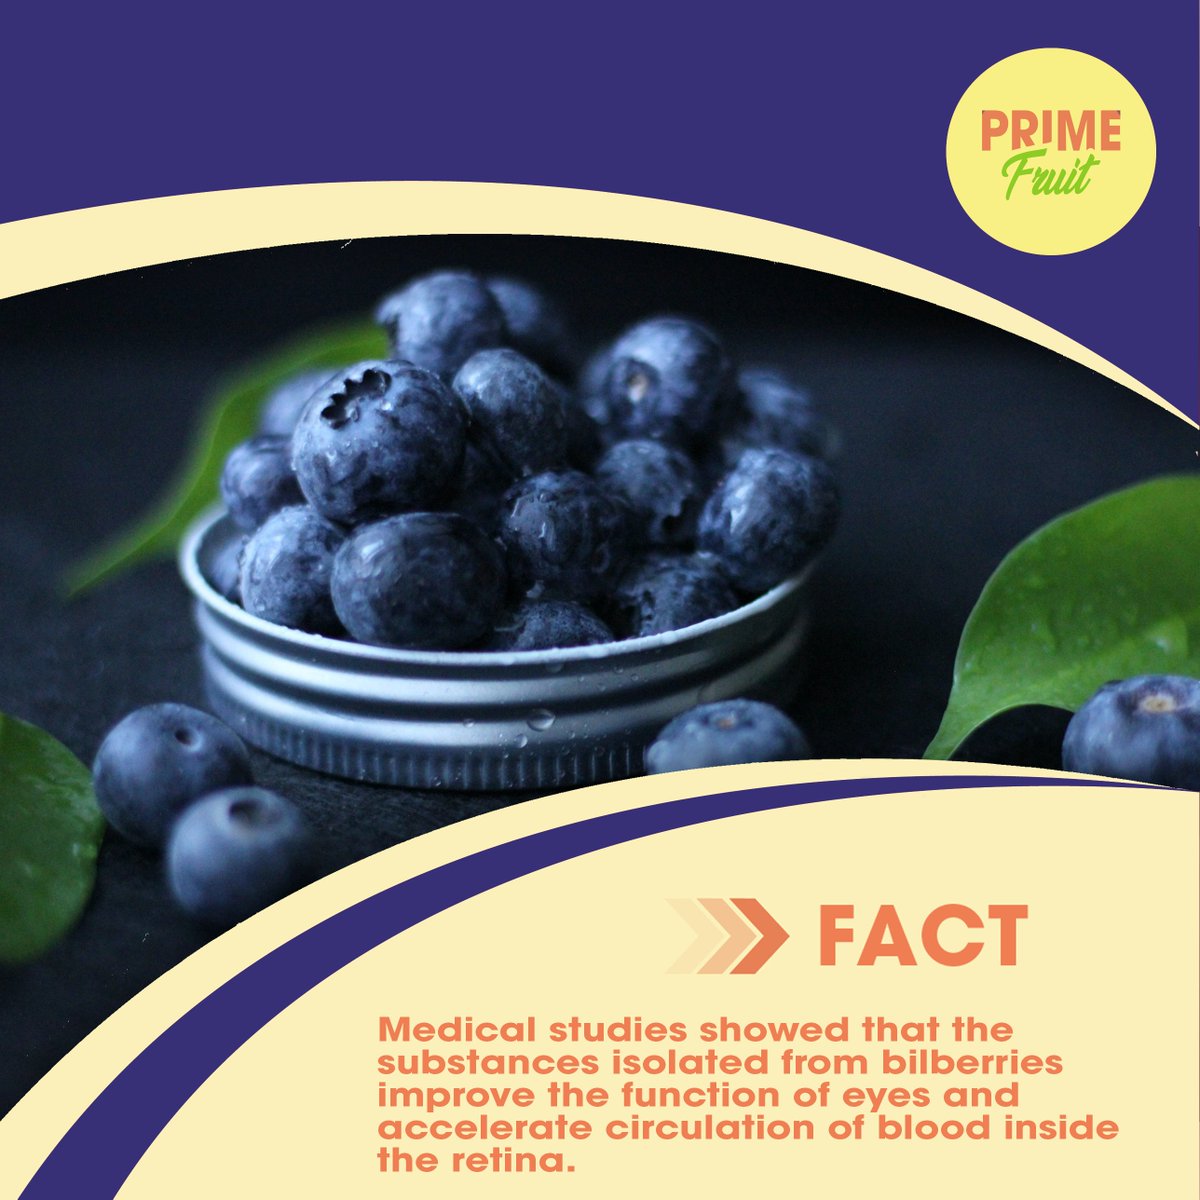 Bilberries may improve vision in people with glaucoma and reduce eye fatigue and dryness in people working with video display terminals. 
.
.
.
.
.
.
#dxblife #UAE
#mydubailife #dxblife🇦🇪 #DubaiLife #dxb
#DubaiFoodie #MyDubai #Alaweerfruitandvegetablemarket 
#bilberries